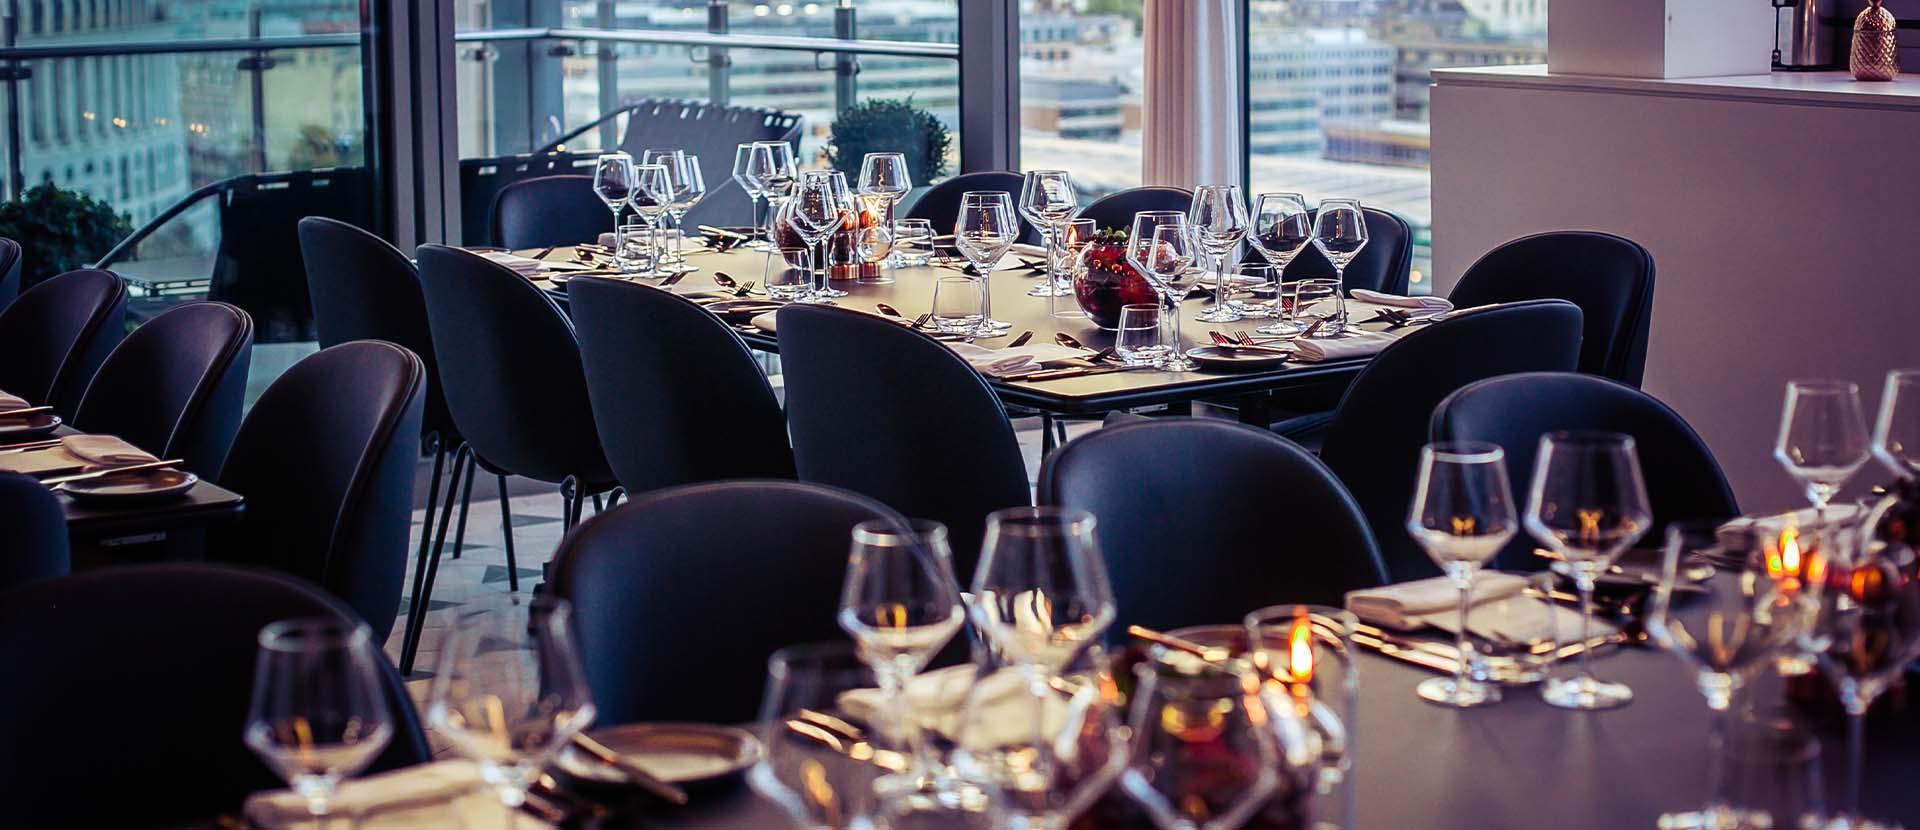 Sea containers dining tables